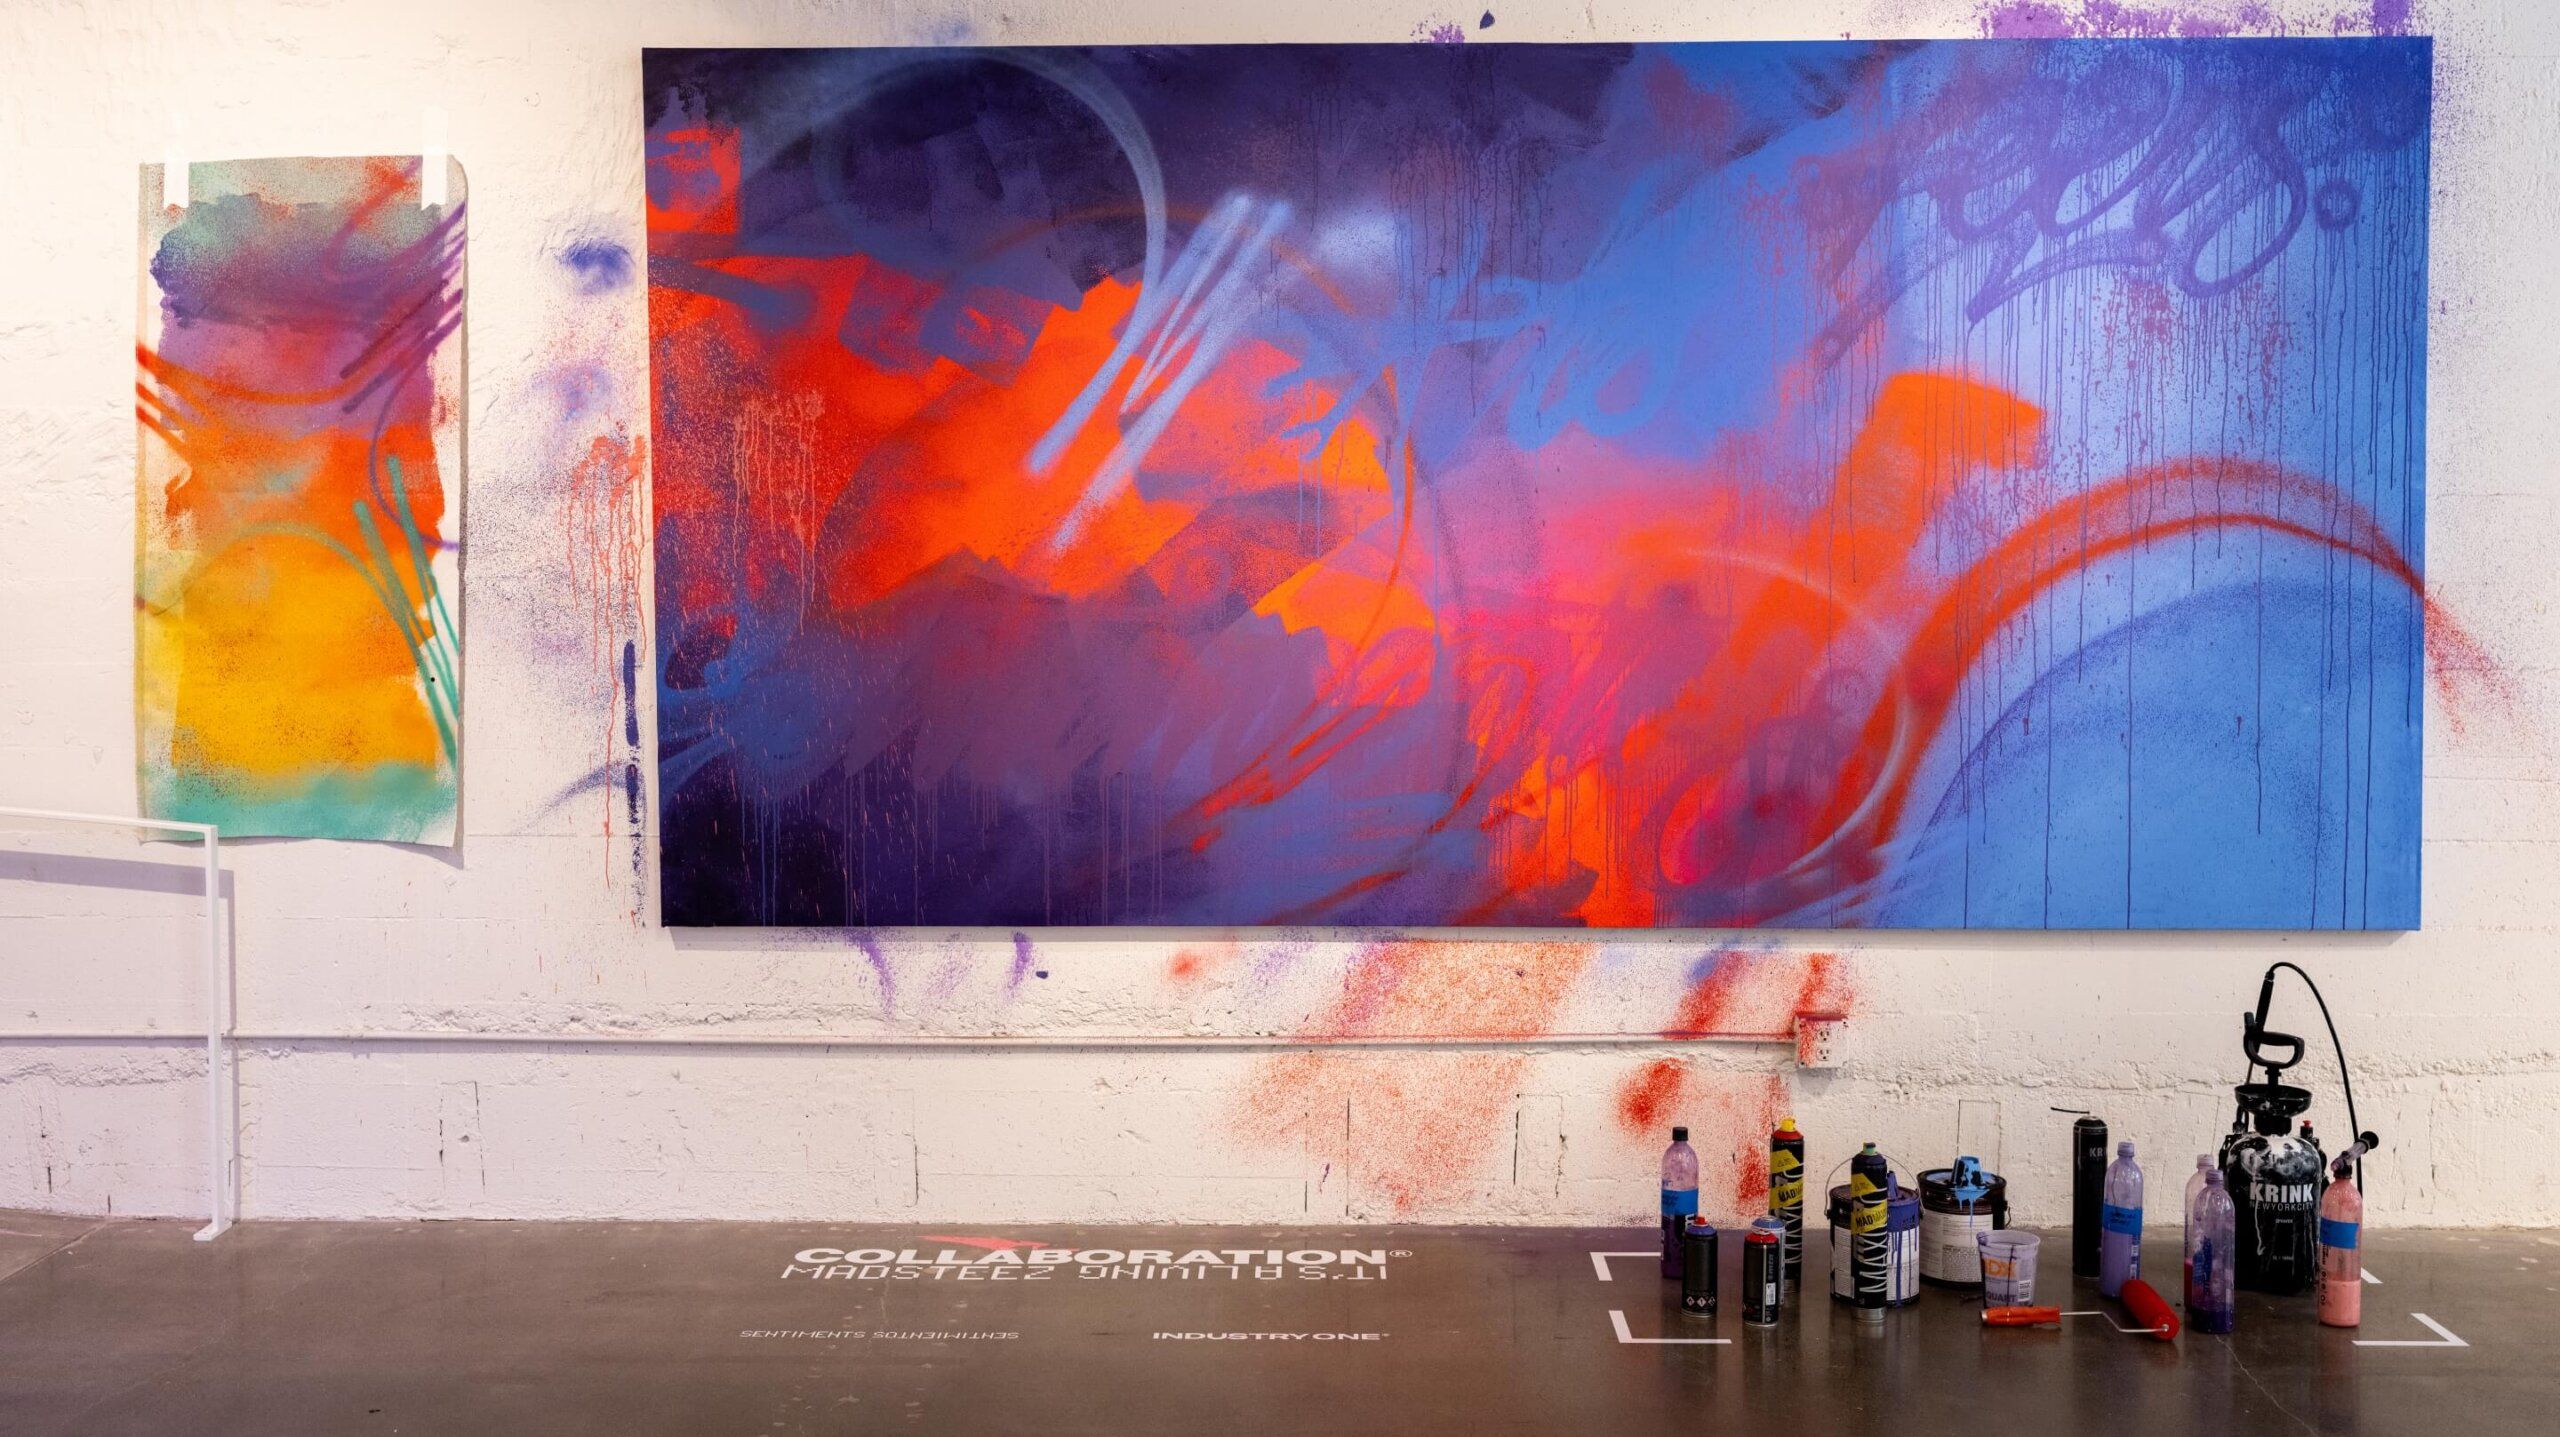 A color test spray painted sheet of paper taped next to a large colorful painting. Painting supplies are on the floor in front of painting as part of the exhibit